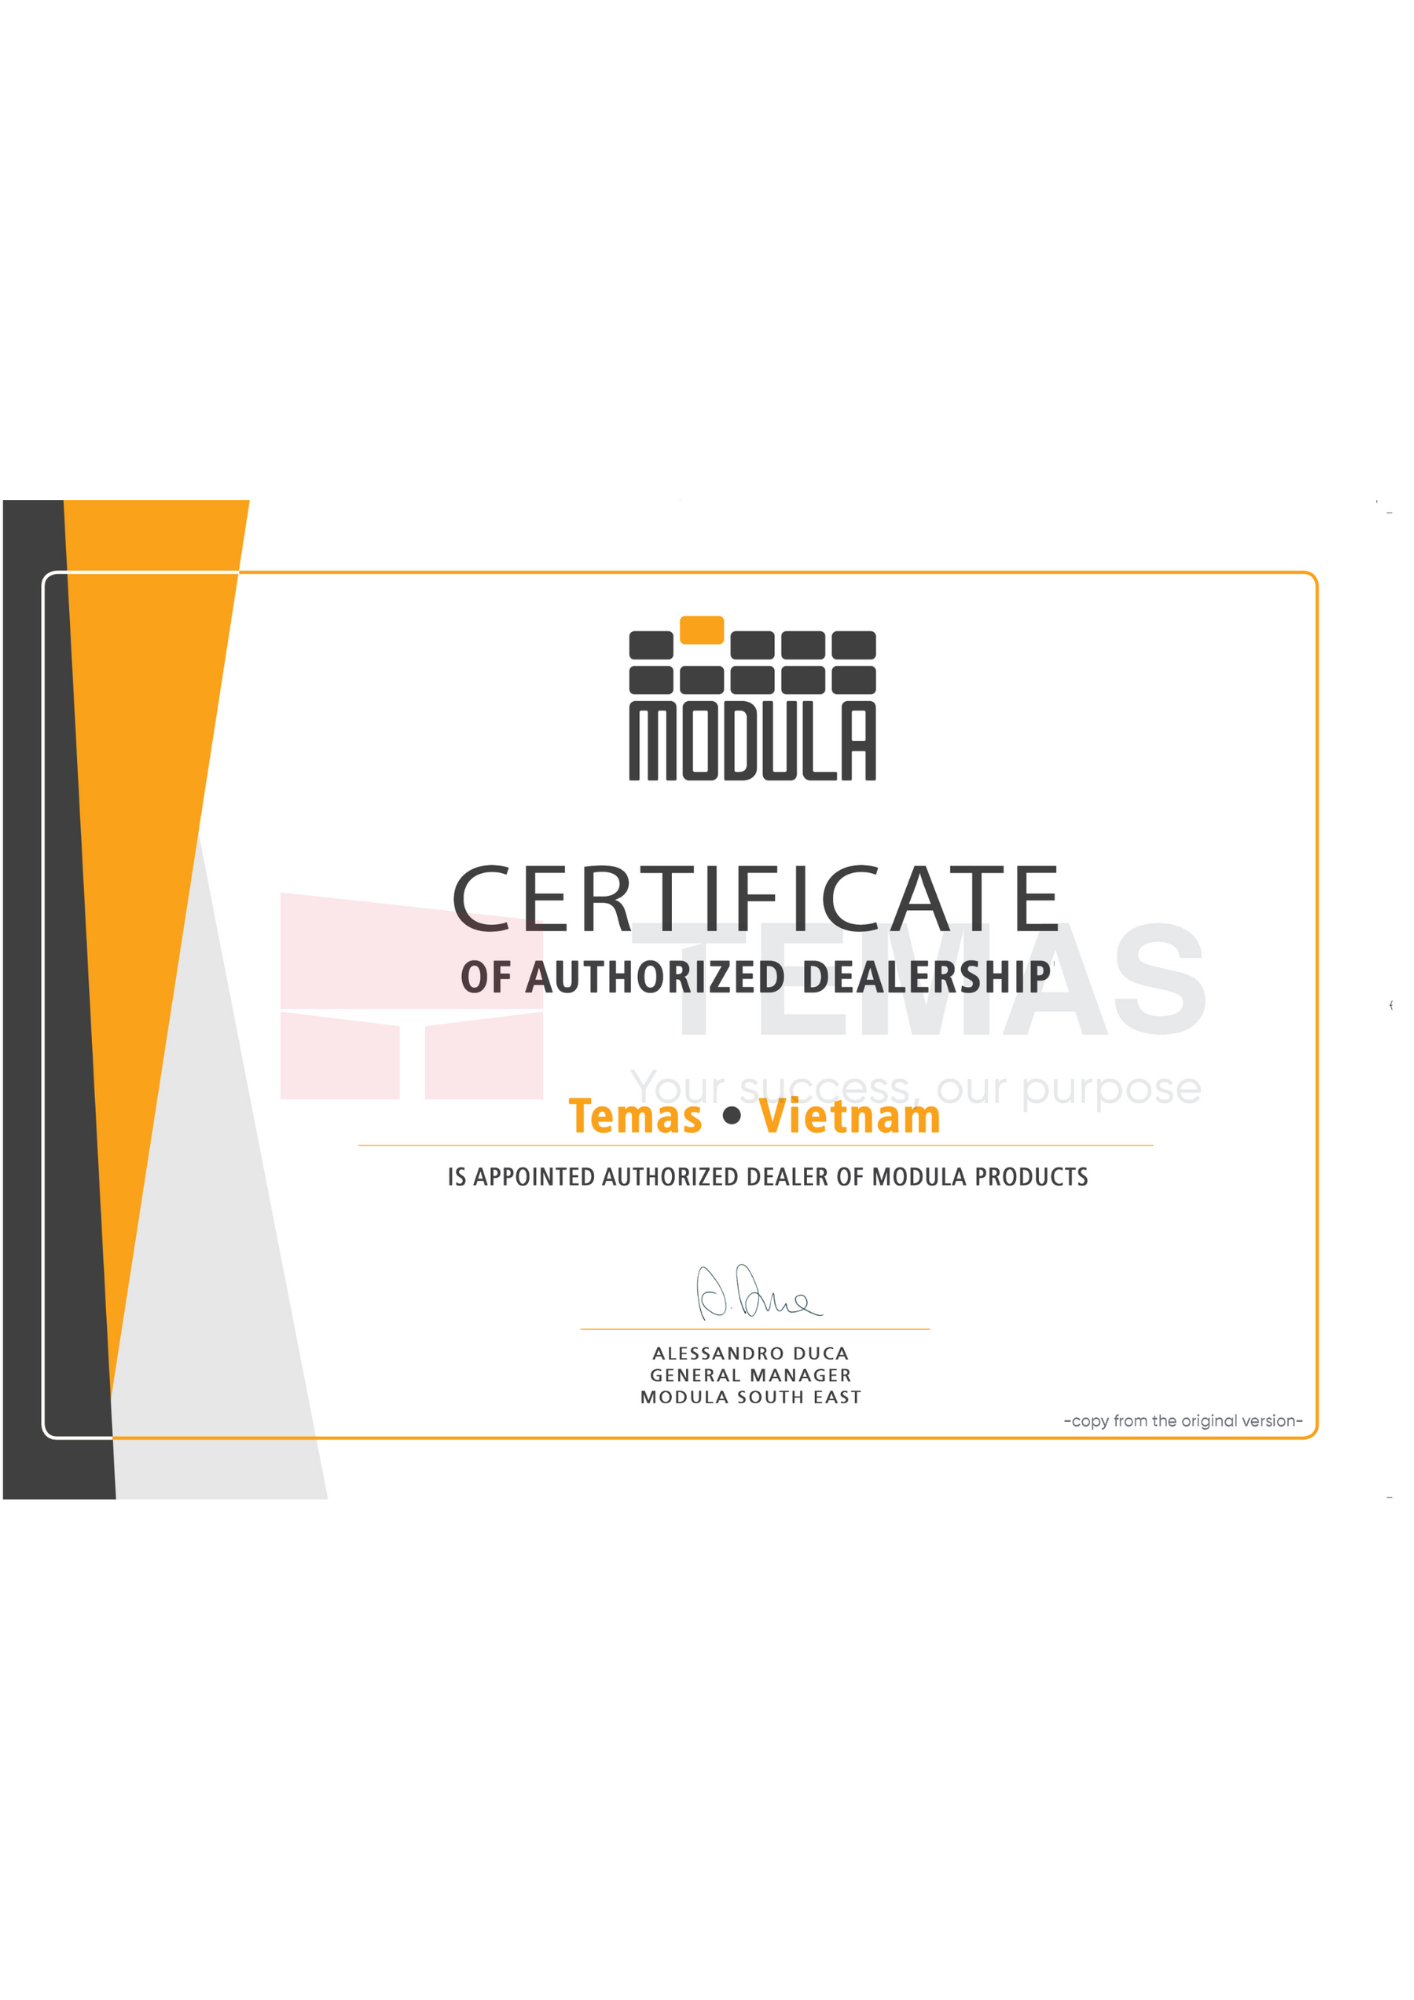 Modula [/br] Certificate of Authorized Dealership